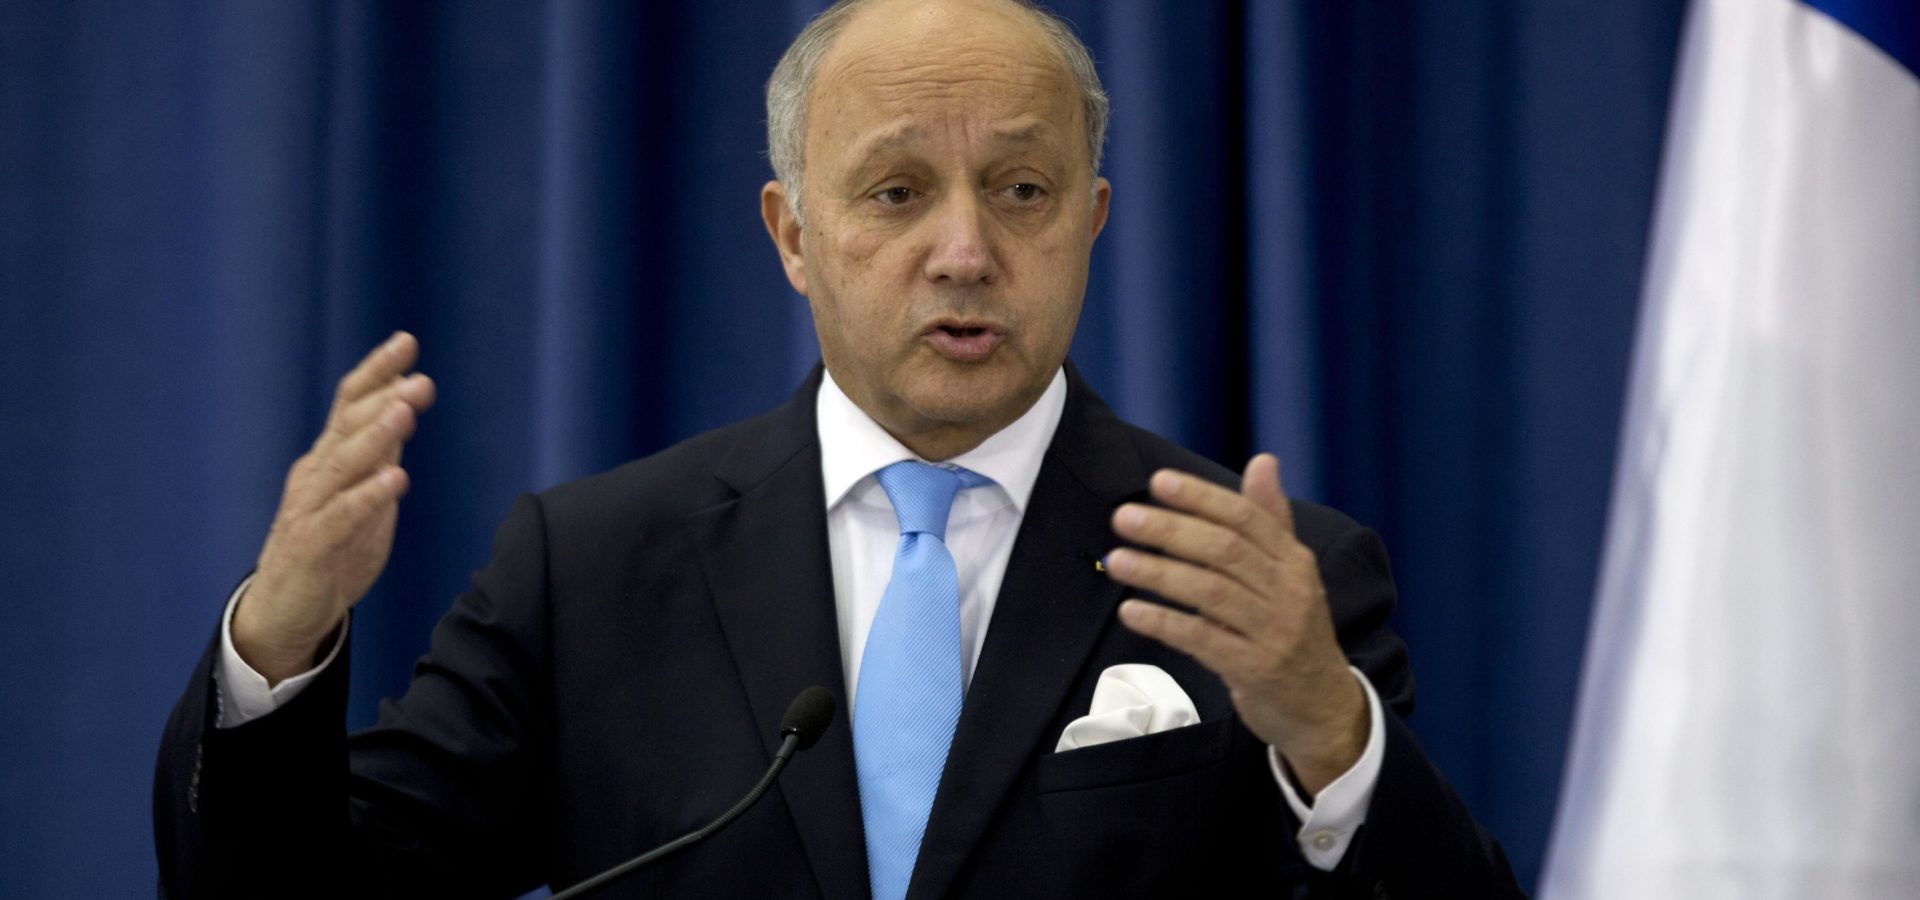 French Foreign Minister Laurent Fabius speaks during a press conference with Palestinian Foreign Minister Riyad Al-Maliki in the West Bank city of Ramallah, Sunday, June 21, 2015. (AP Photo/Majdi Mohammed)